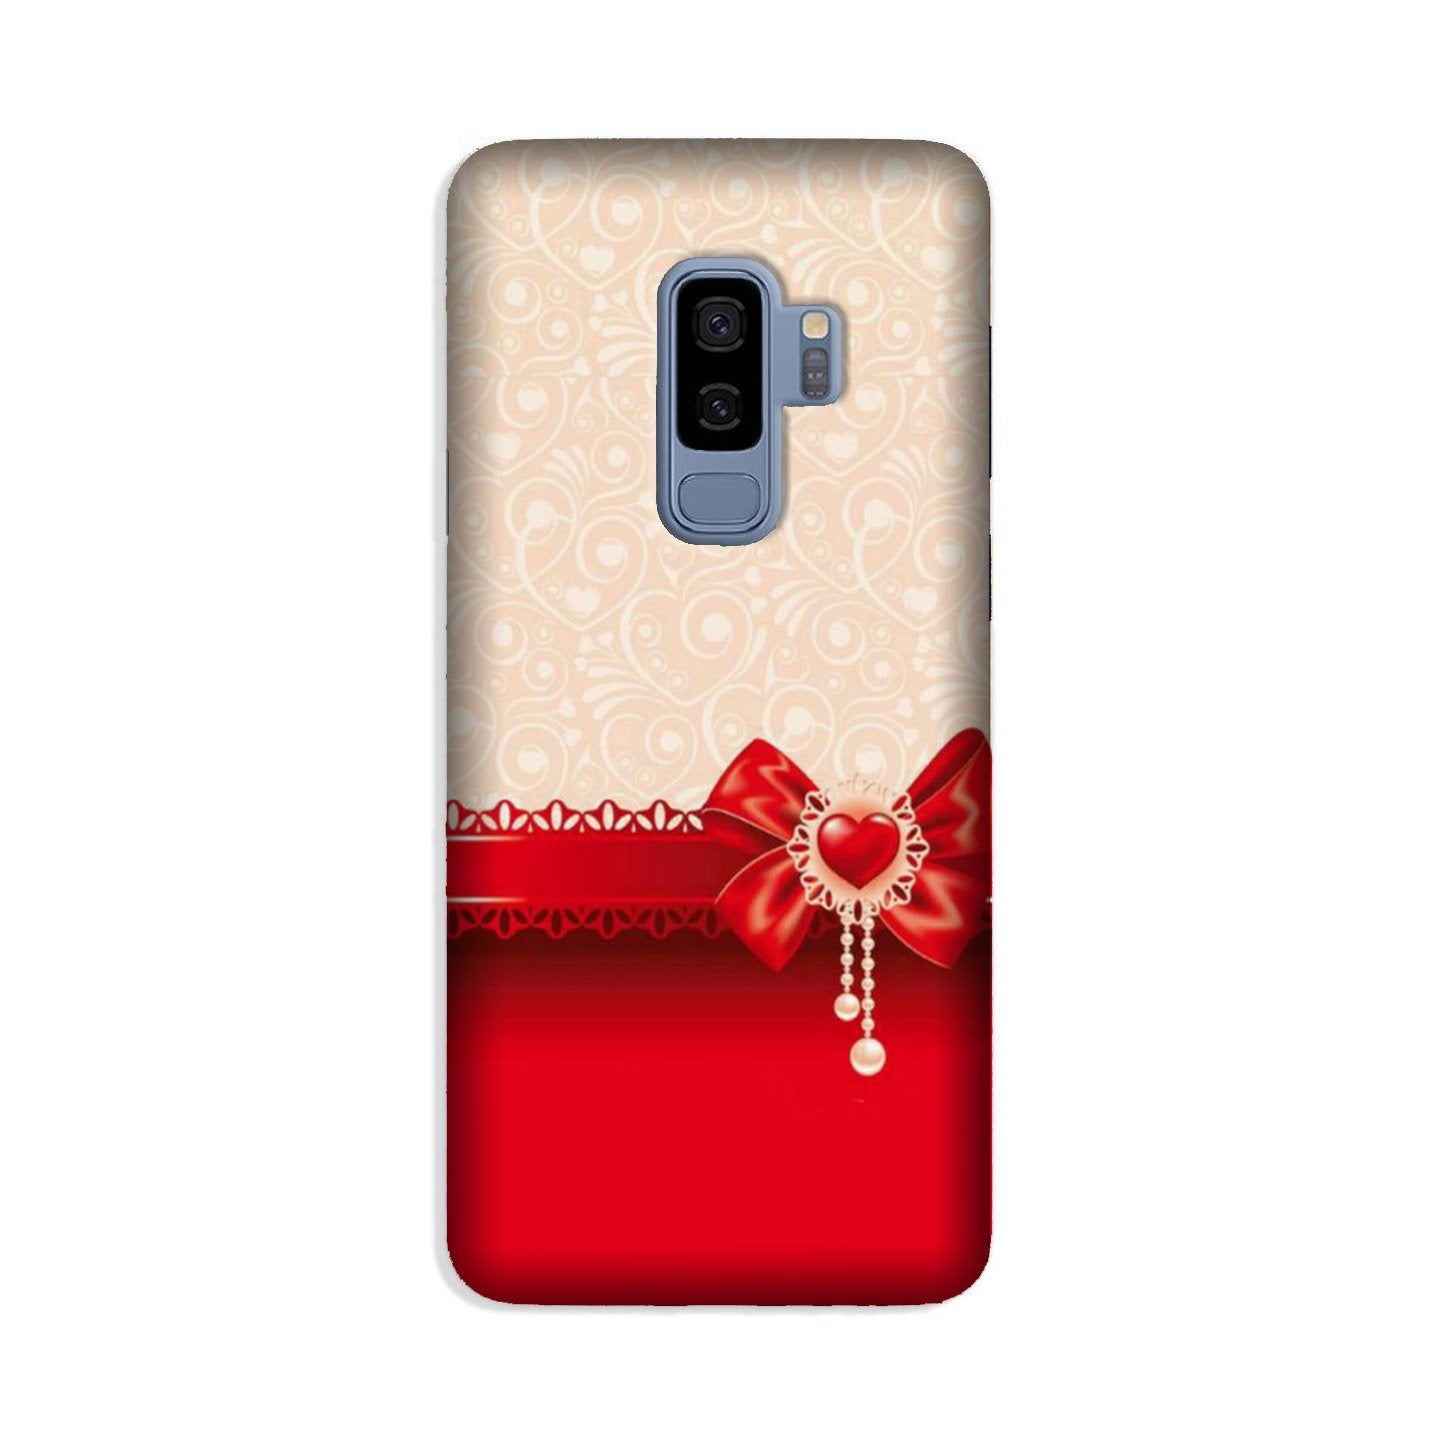 Gift Wrap3 Case for Galaxy S9 Plus